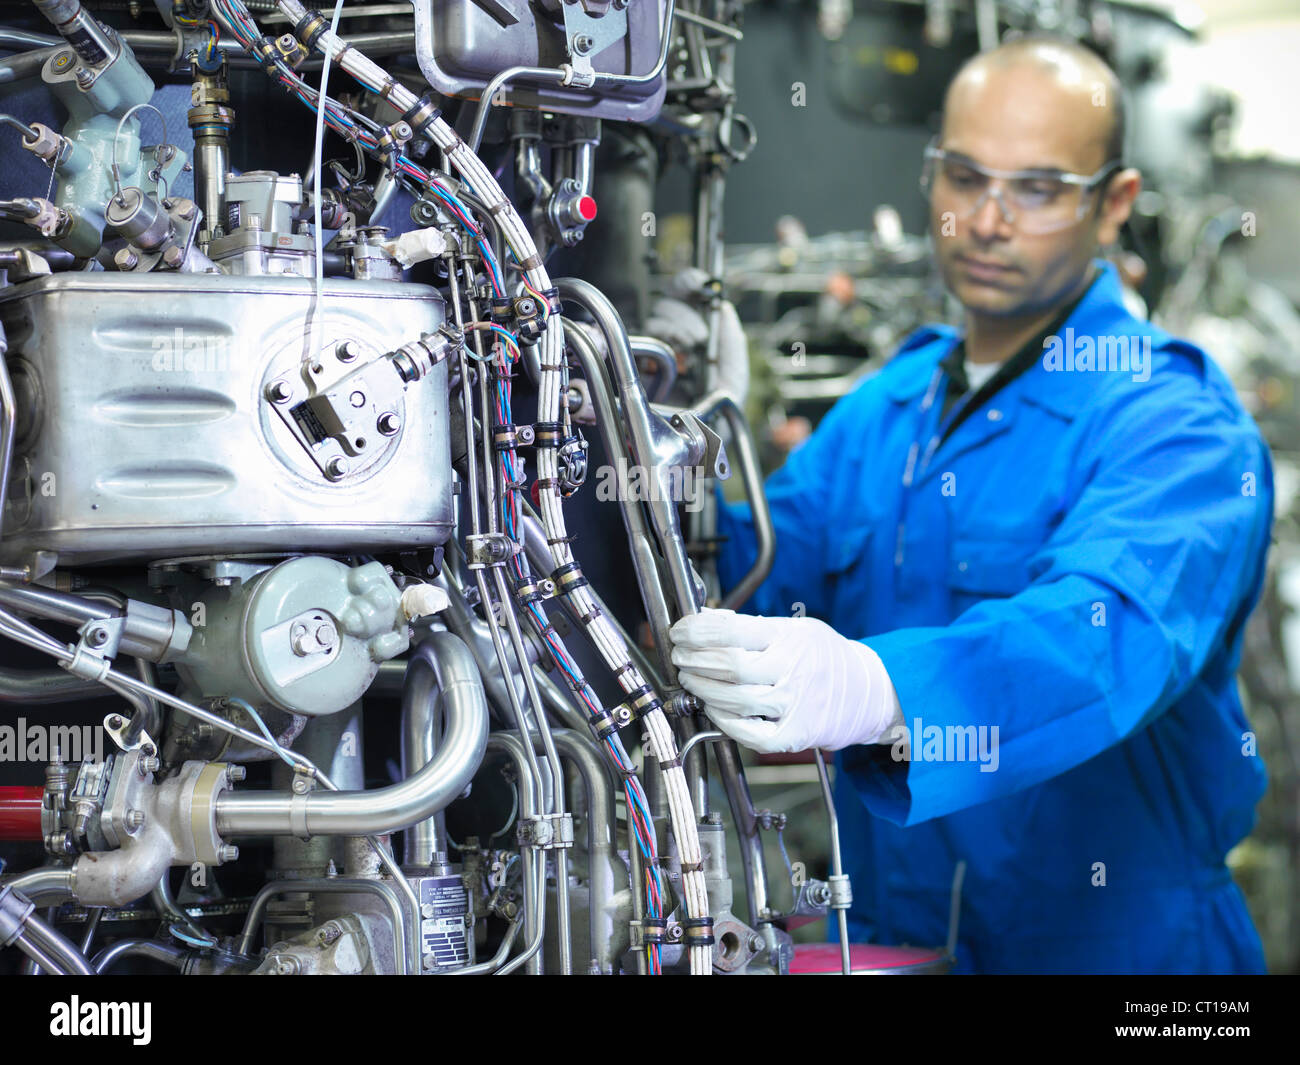 Worker examining machinery on drums Stock Photo